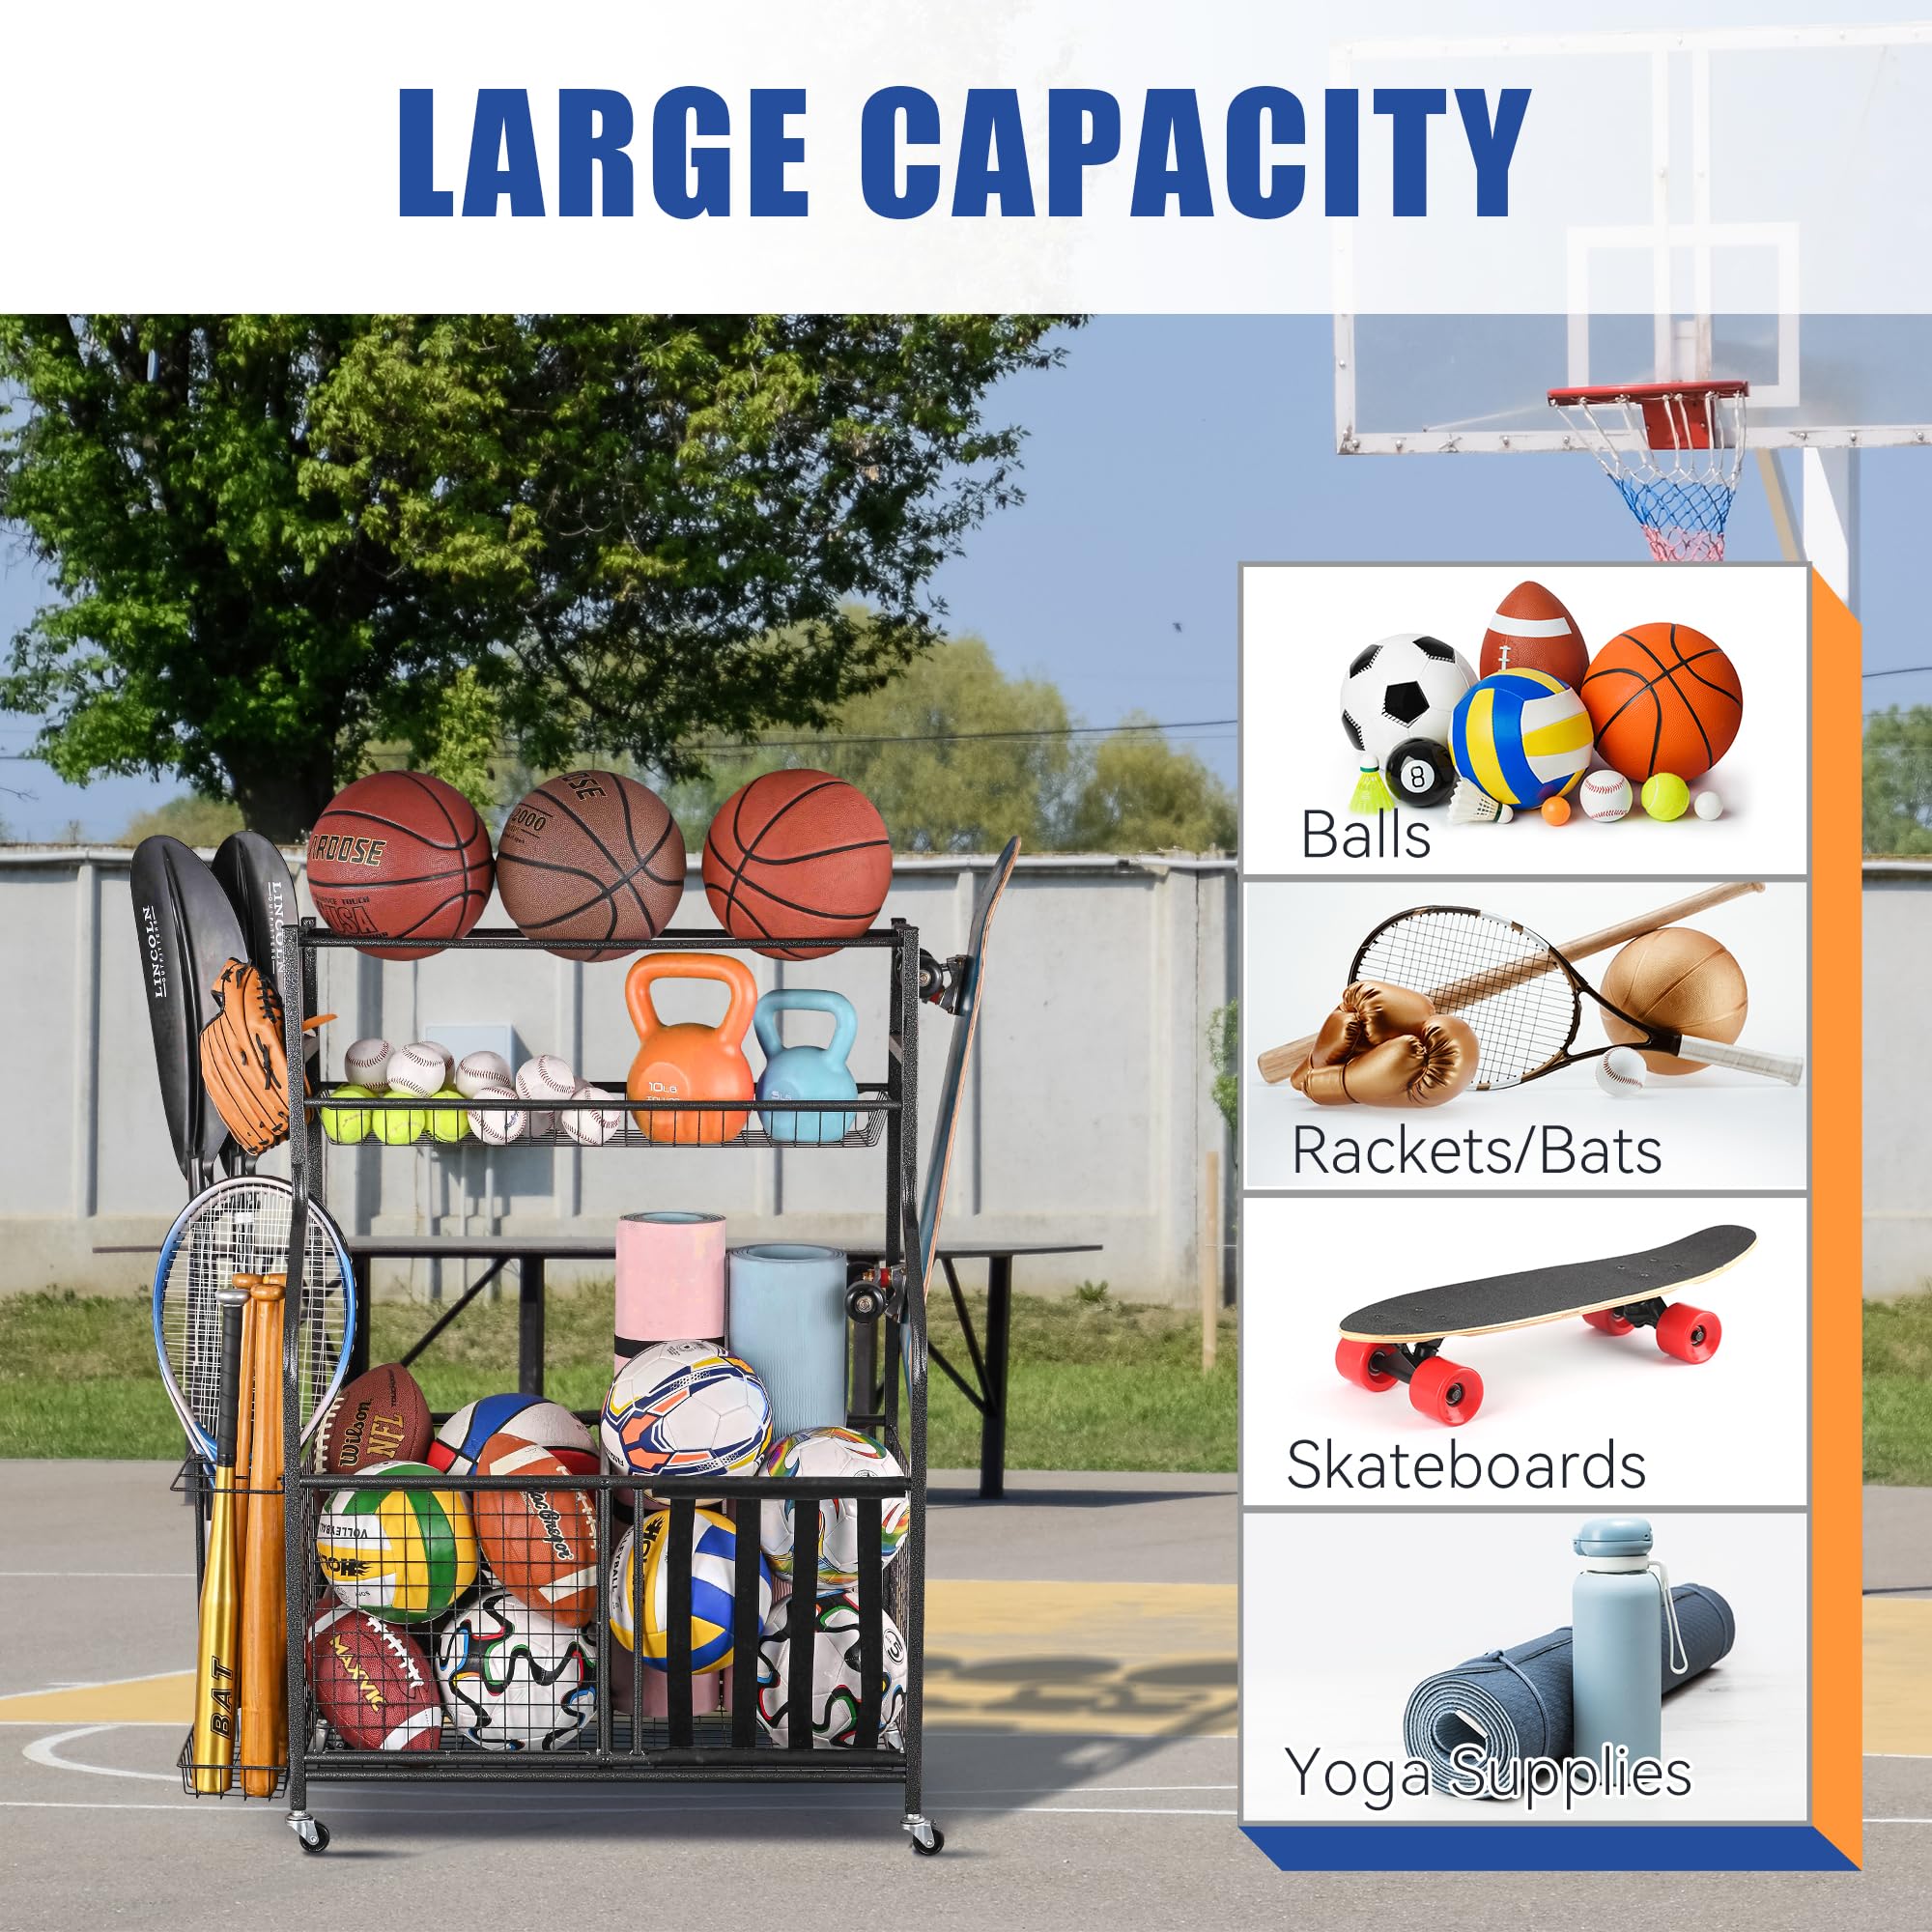 Mythinglogic Sports Equipment Organizer, Large Capacity Storage With Hooks and Baskets, Ball and Toy Organizer for Garage